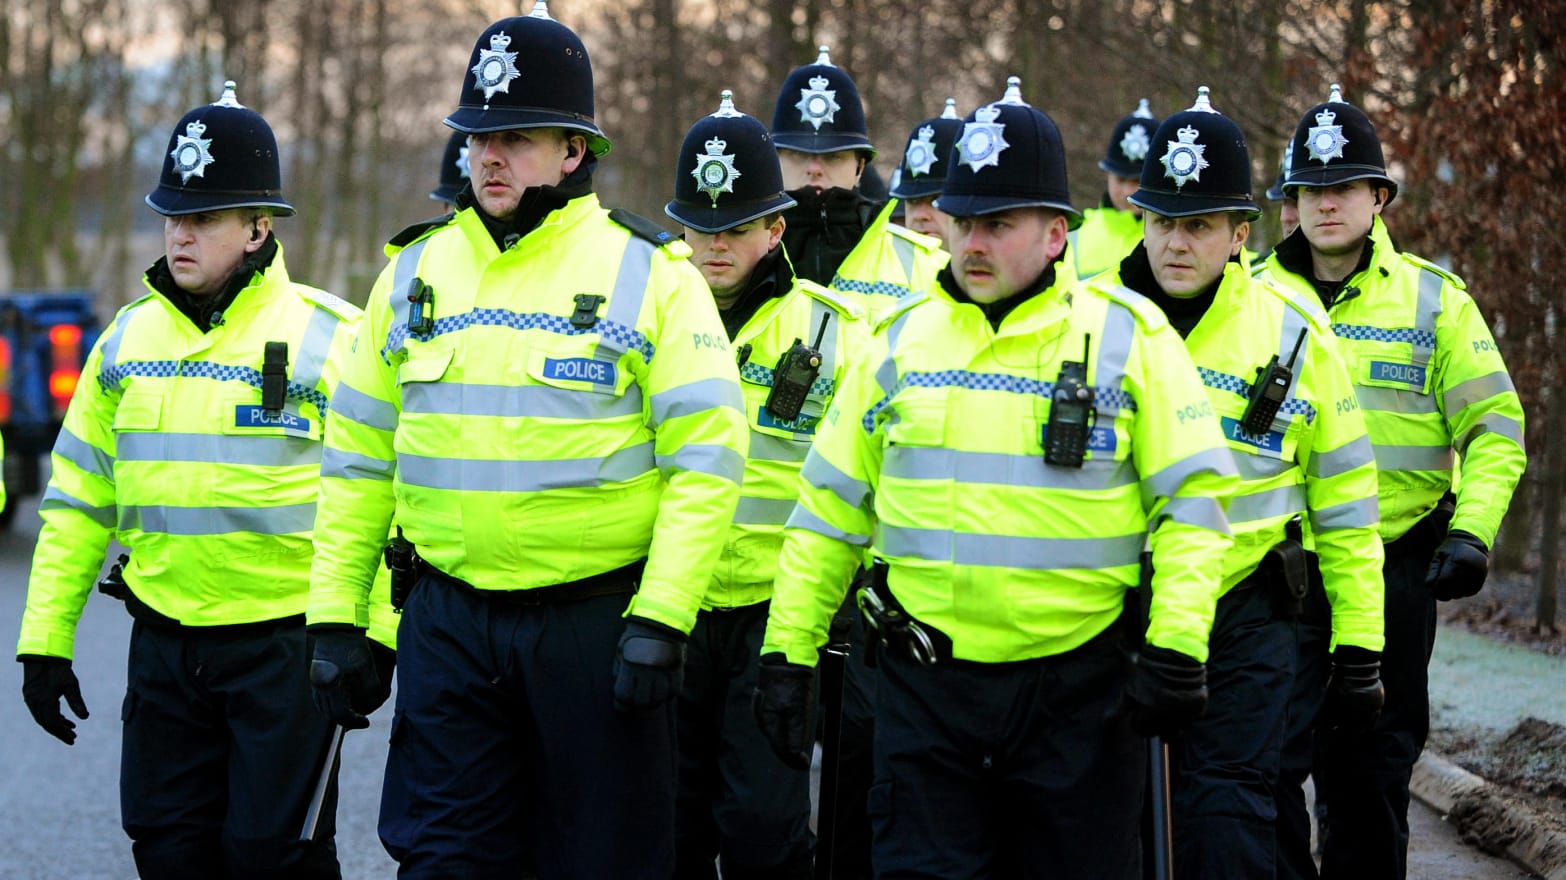 Leadership in the UK Police Force